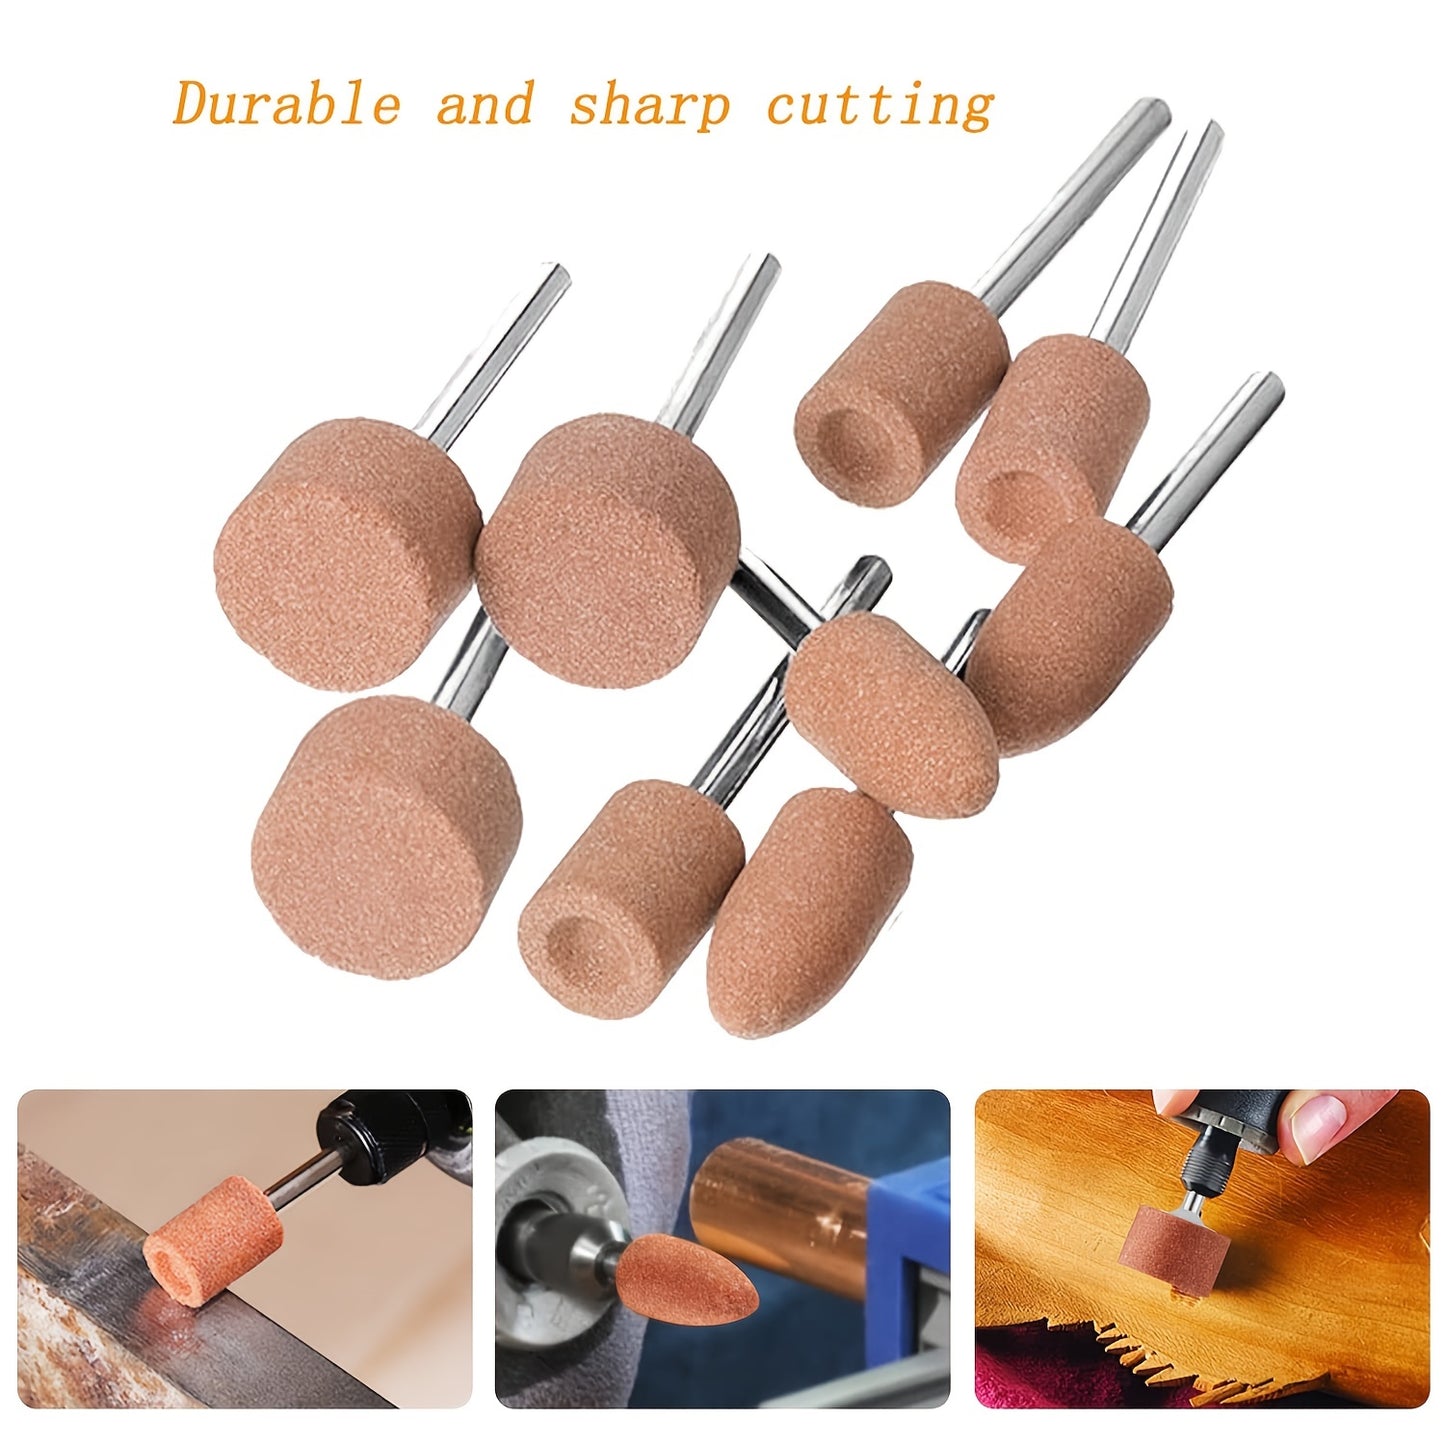 18pcs Grinding Stone Set For Rotary Tool, Sanding Drill Bit With 1/8"Shank Abrasive Mounted Grinding Wheel Head Accessories For Grinding Stones, Jade Polishing, Rust Removal Metal